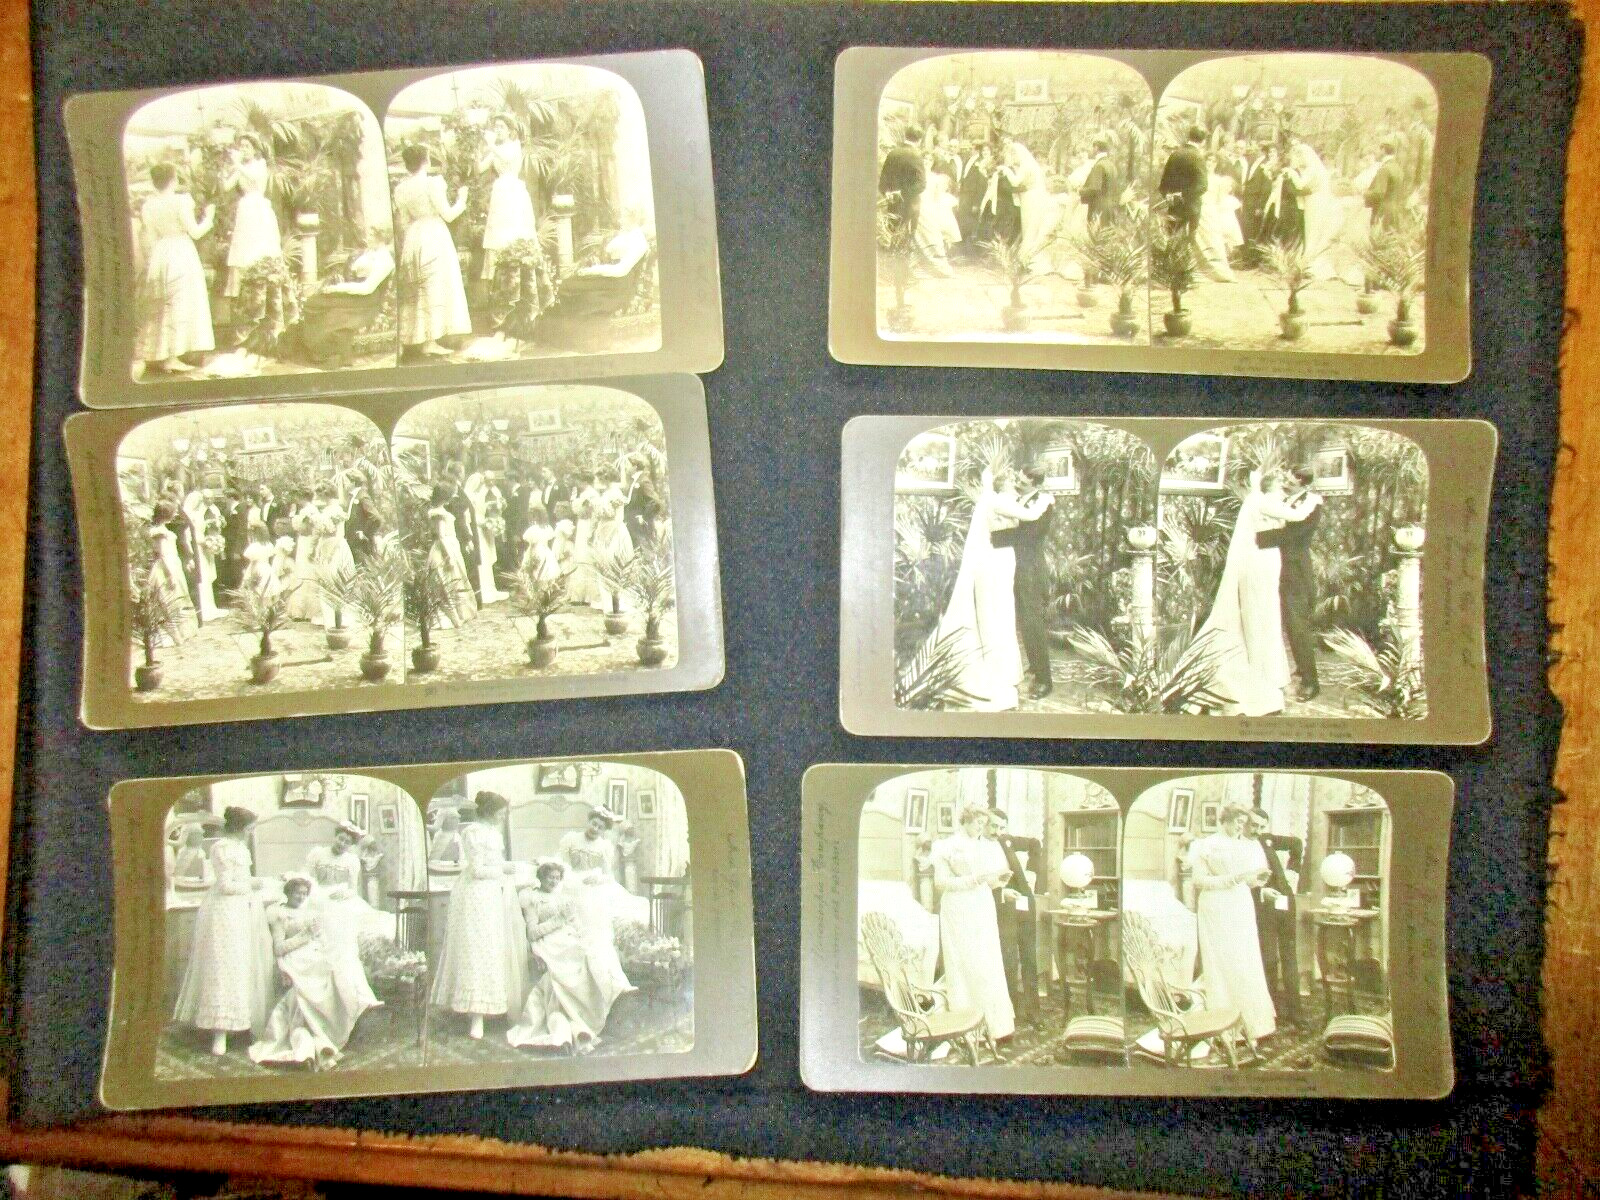 Lot of 6 Stereo View Stereoview Cards American View Co 1900 WEDDING BRIDE #1